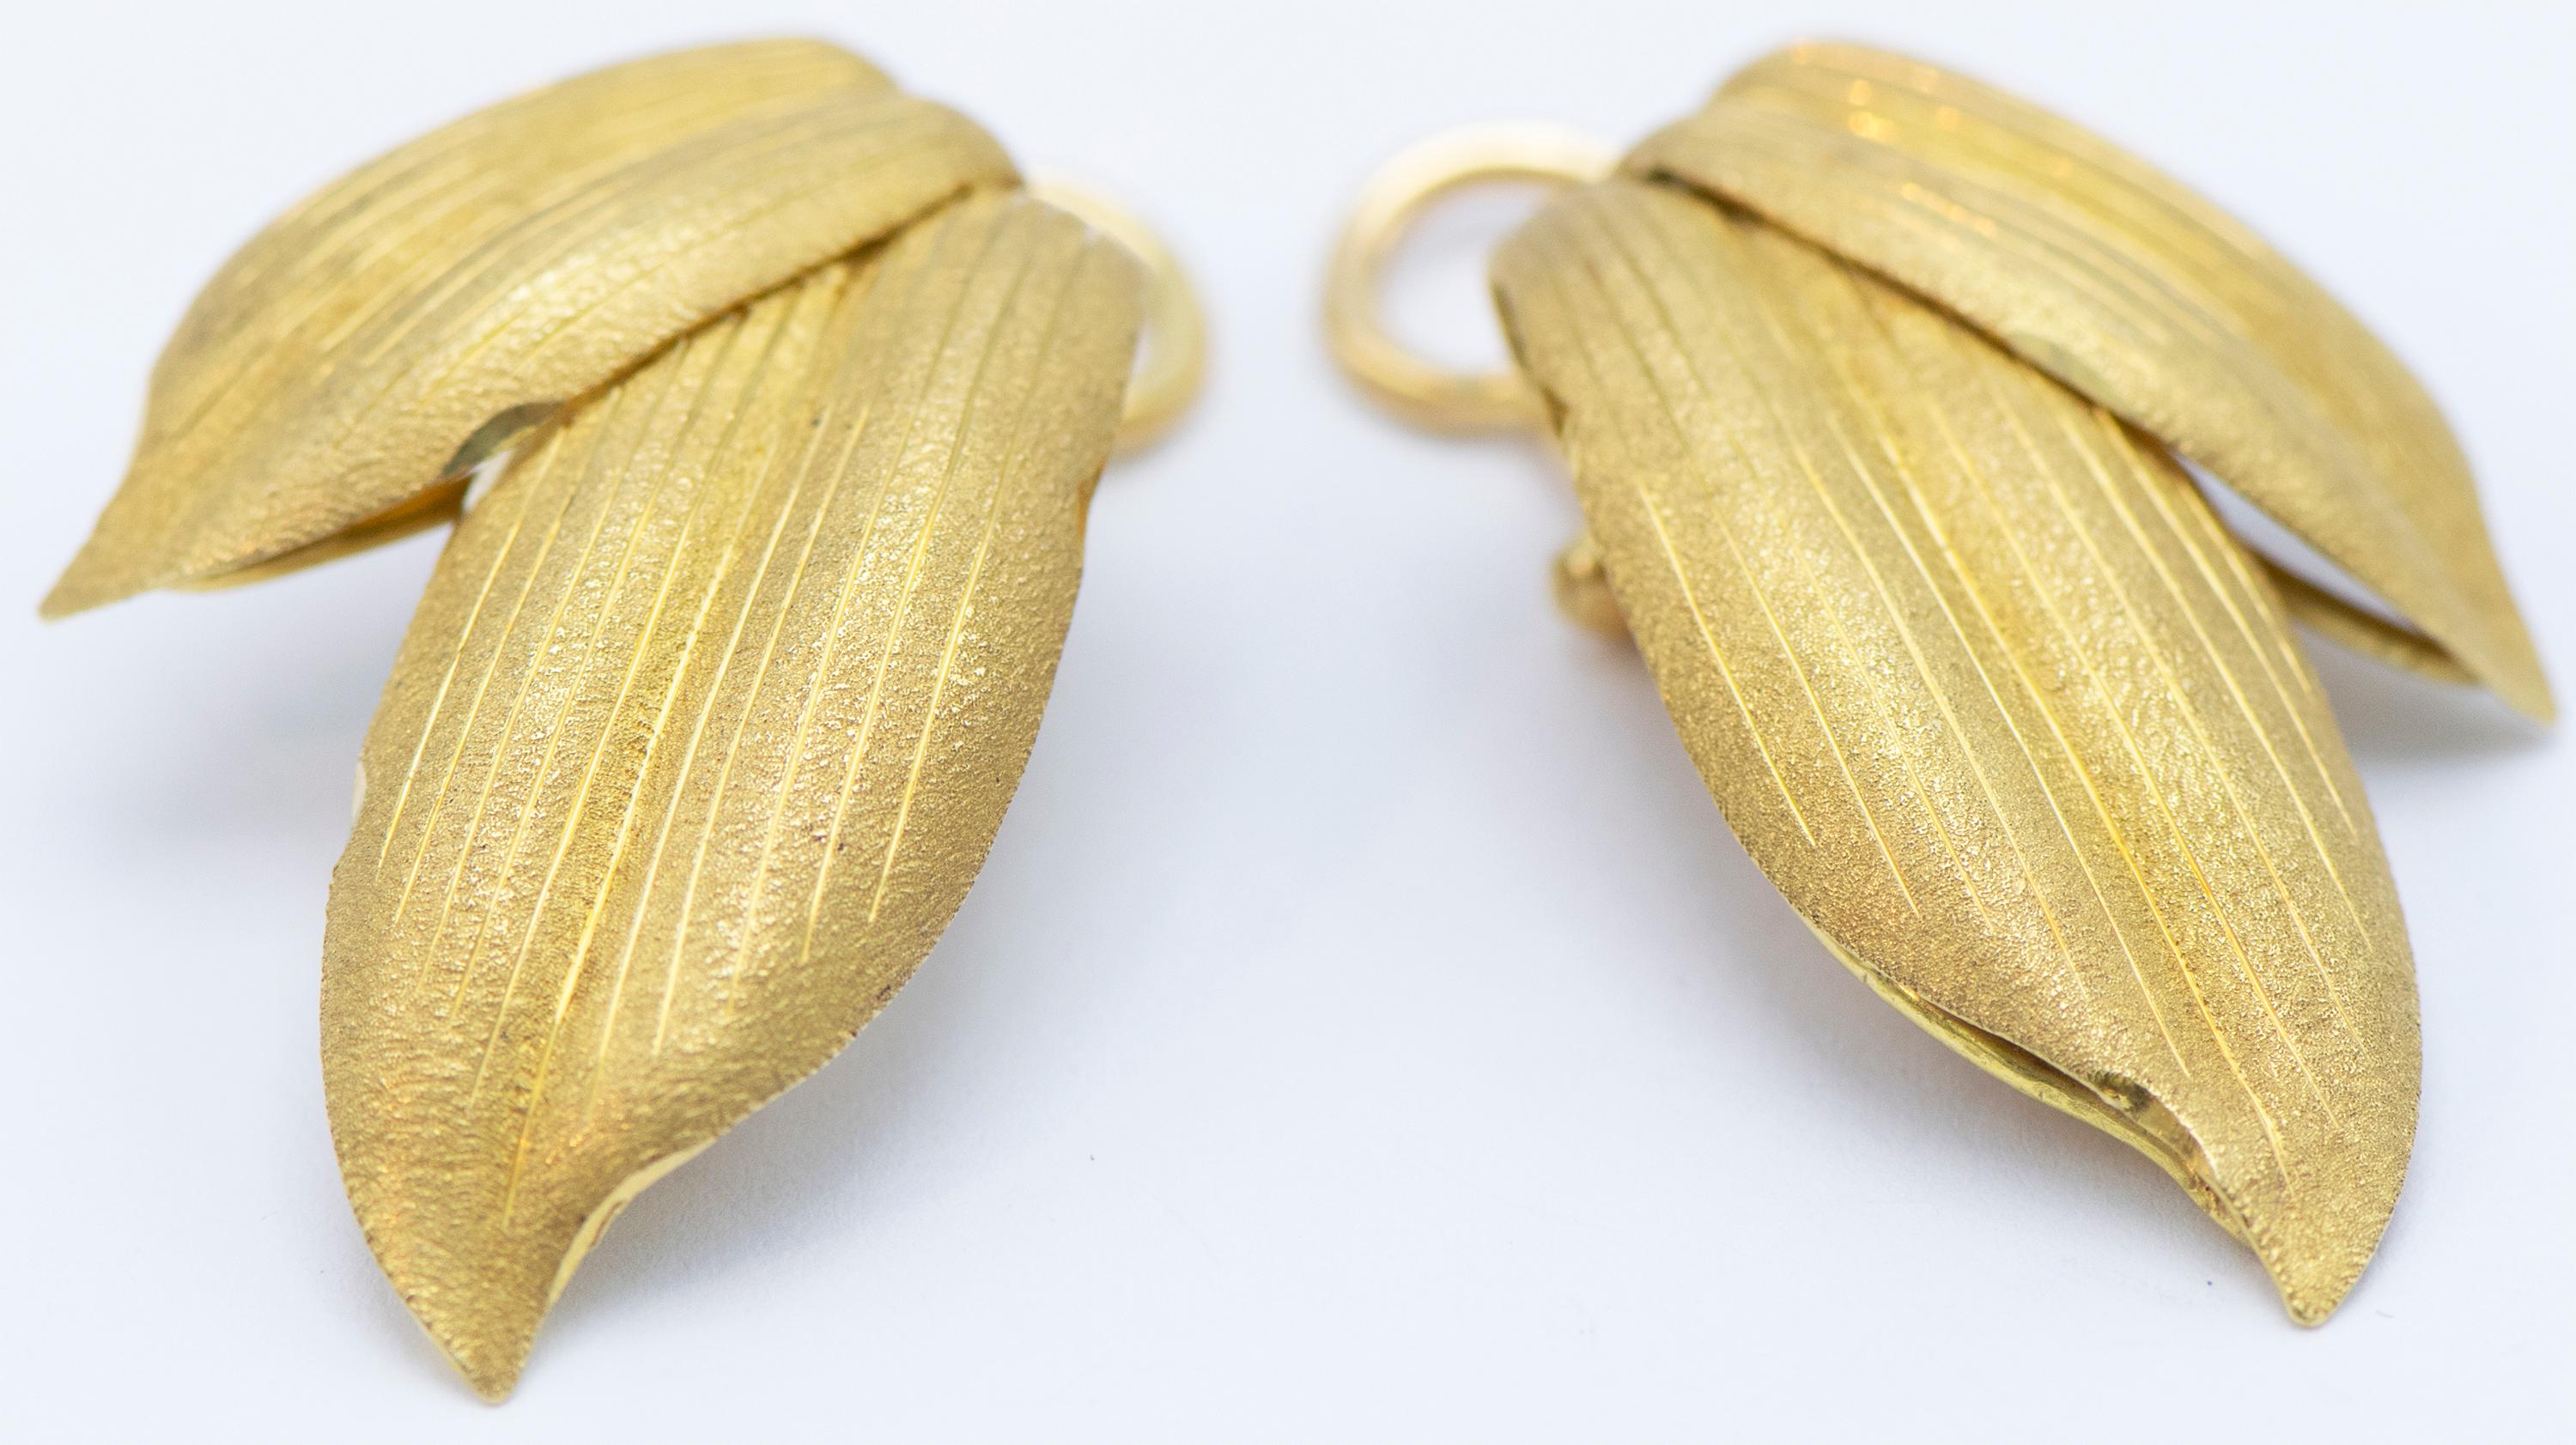 Leaf design in 18Kt Yellow Gold measuring 1 1/4 inches x 0.50 inches weighing 11.9 grams in total. Signed Buccellati with a maker mark, Italy. Circa 1980